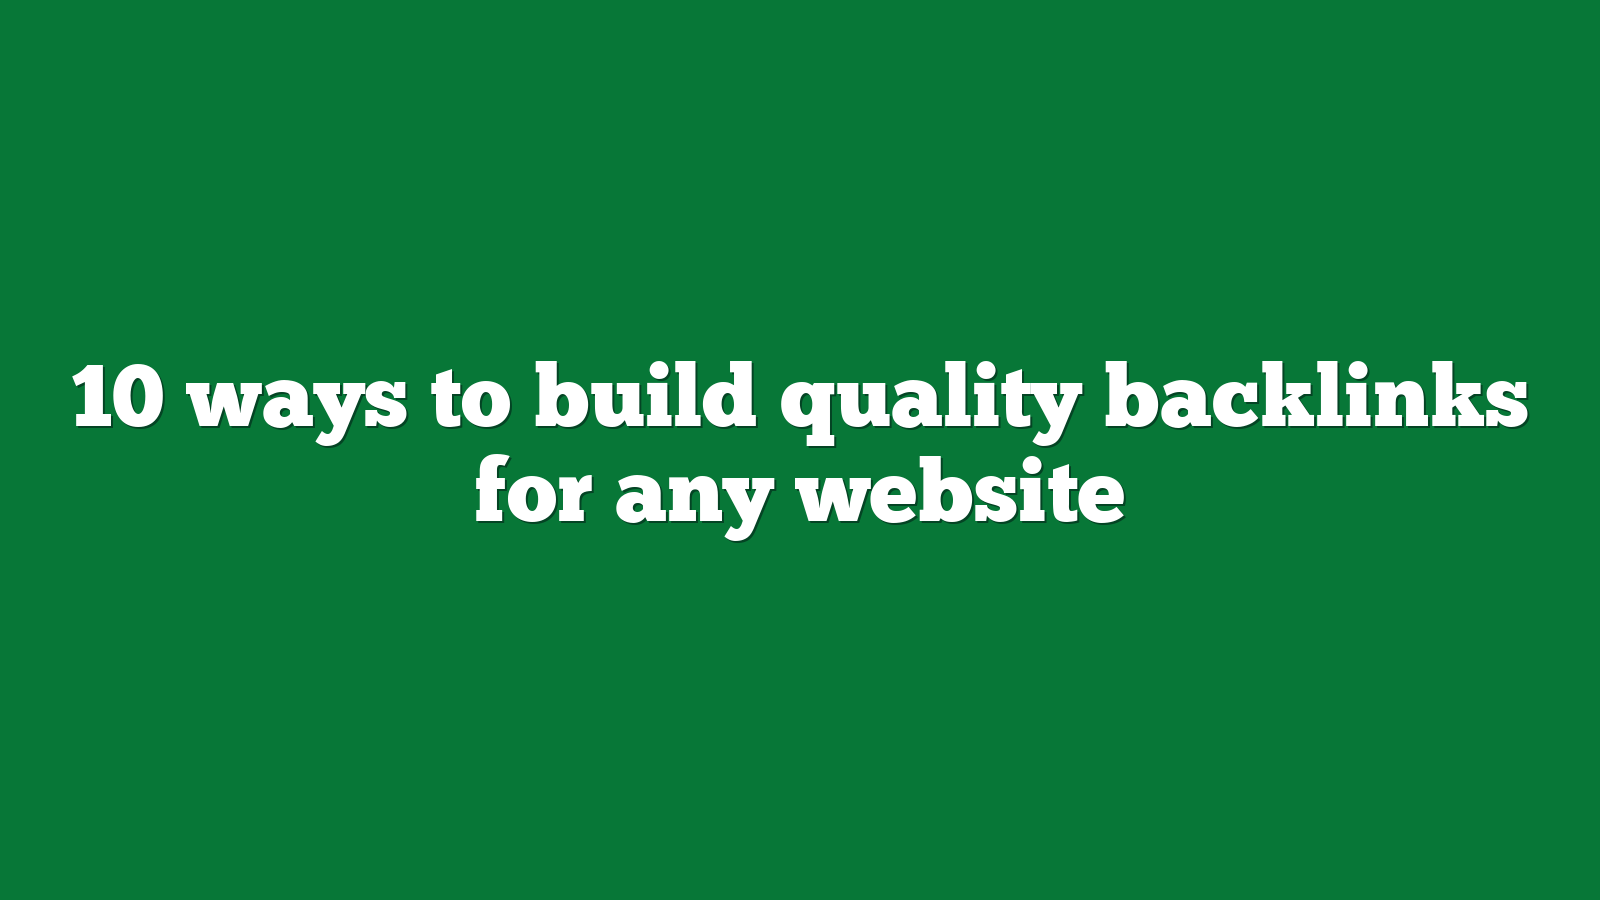 10 ways to build quality backlinks for any website